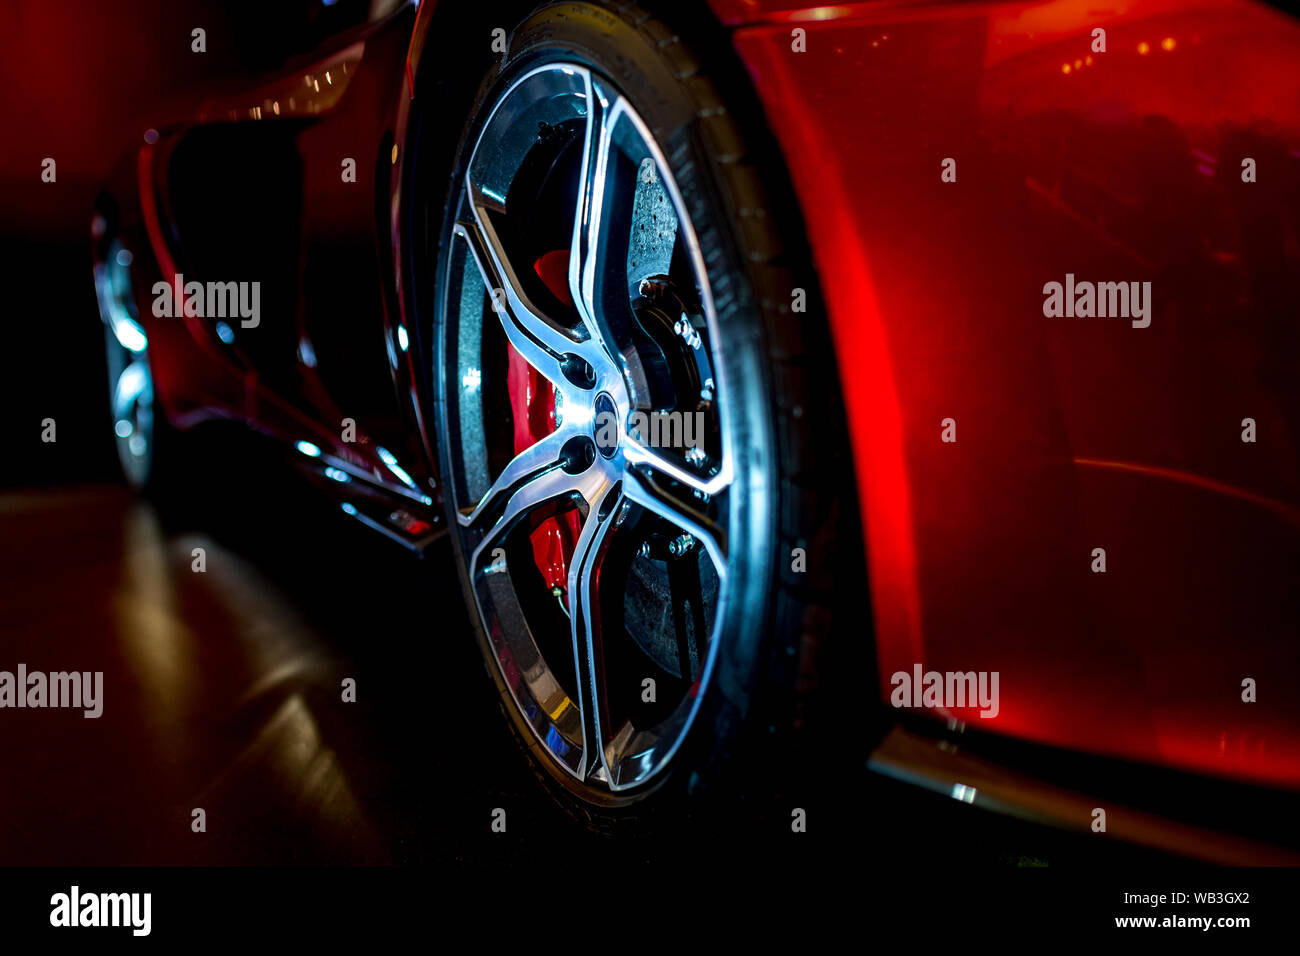 Close Up on beautiful modern supercar with dramatic lighting Stock Photo